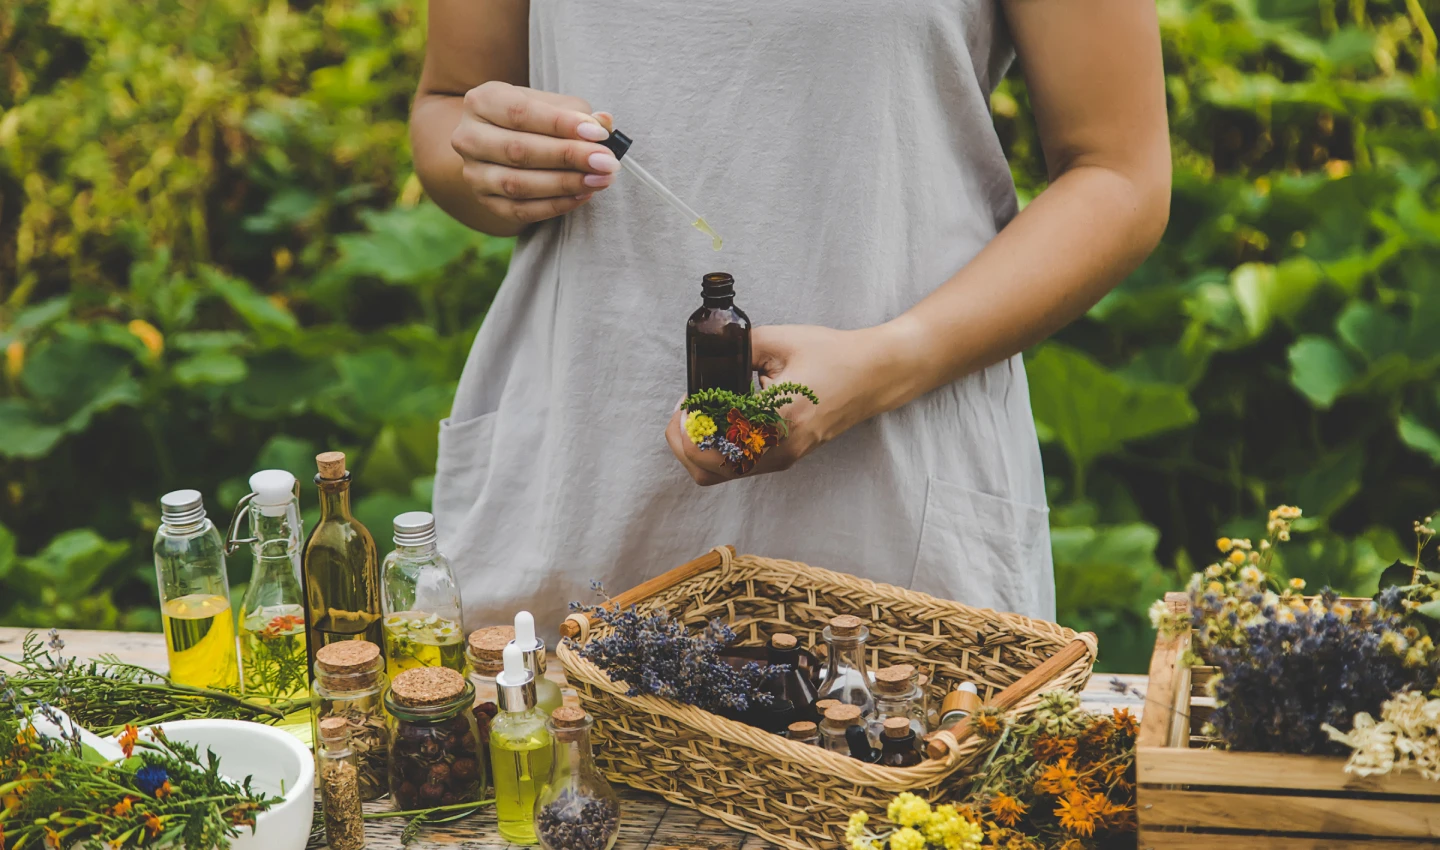 A woman crafting perfume in a natural setting, highlighting the role of essential oils in perfumes